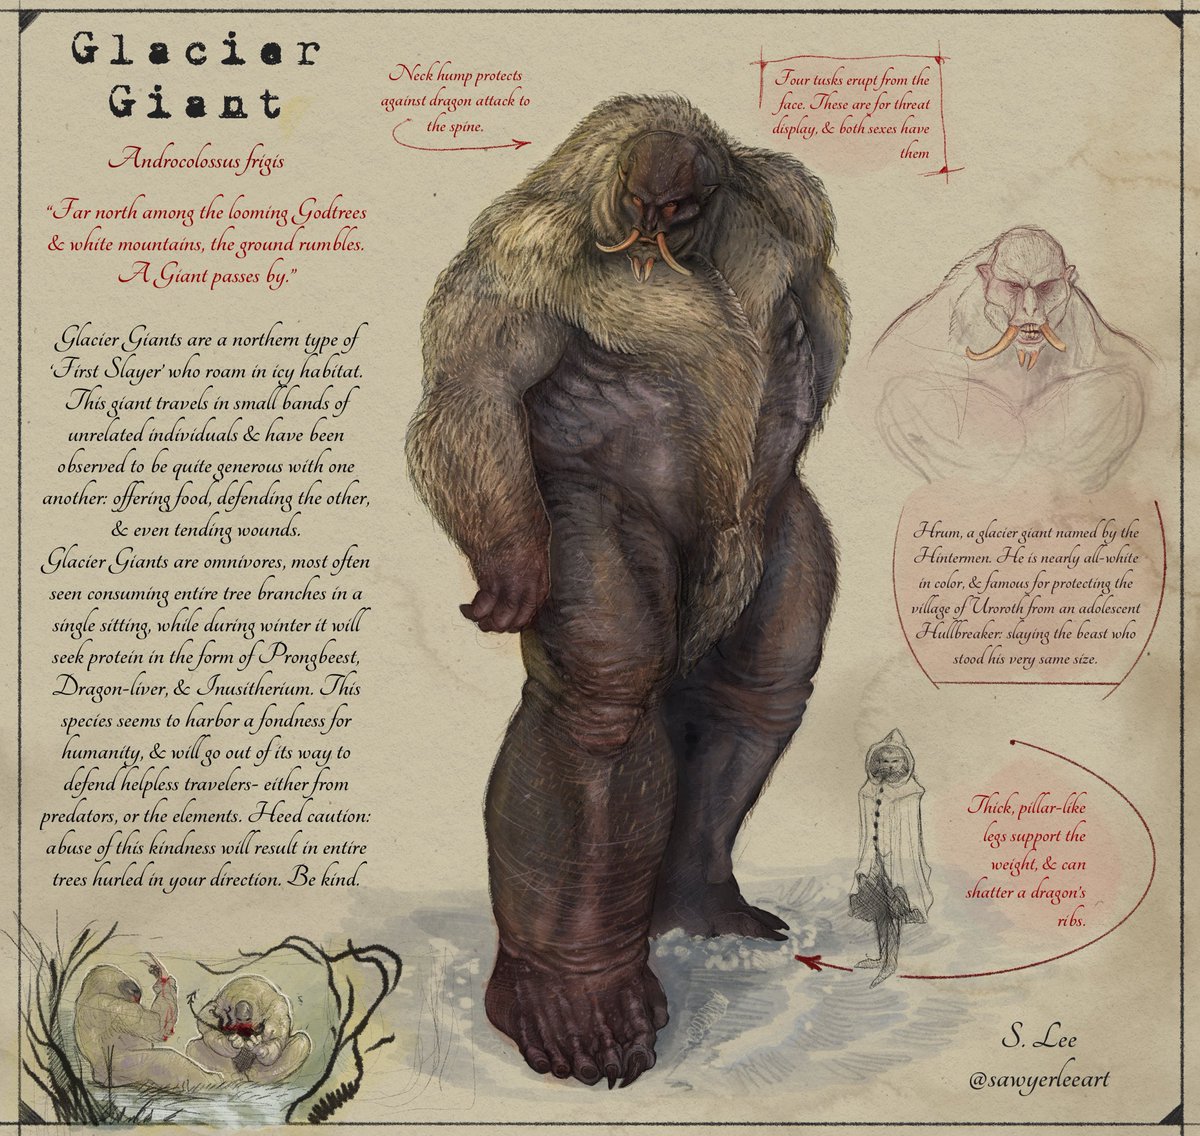 Glacier Giants- the colossi of the north. These are formidable beasts who favor the Godtree- a type of tall pine tree bearing many, many branches. They can be found among ice floes & the mouths of frozen caves as well- finishing off whatever they last ate.